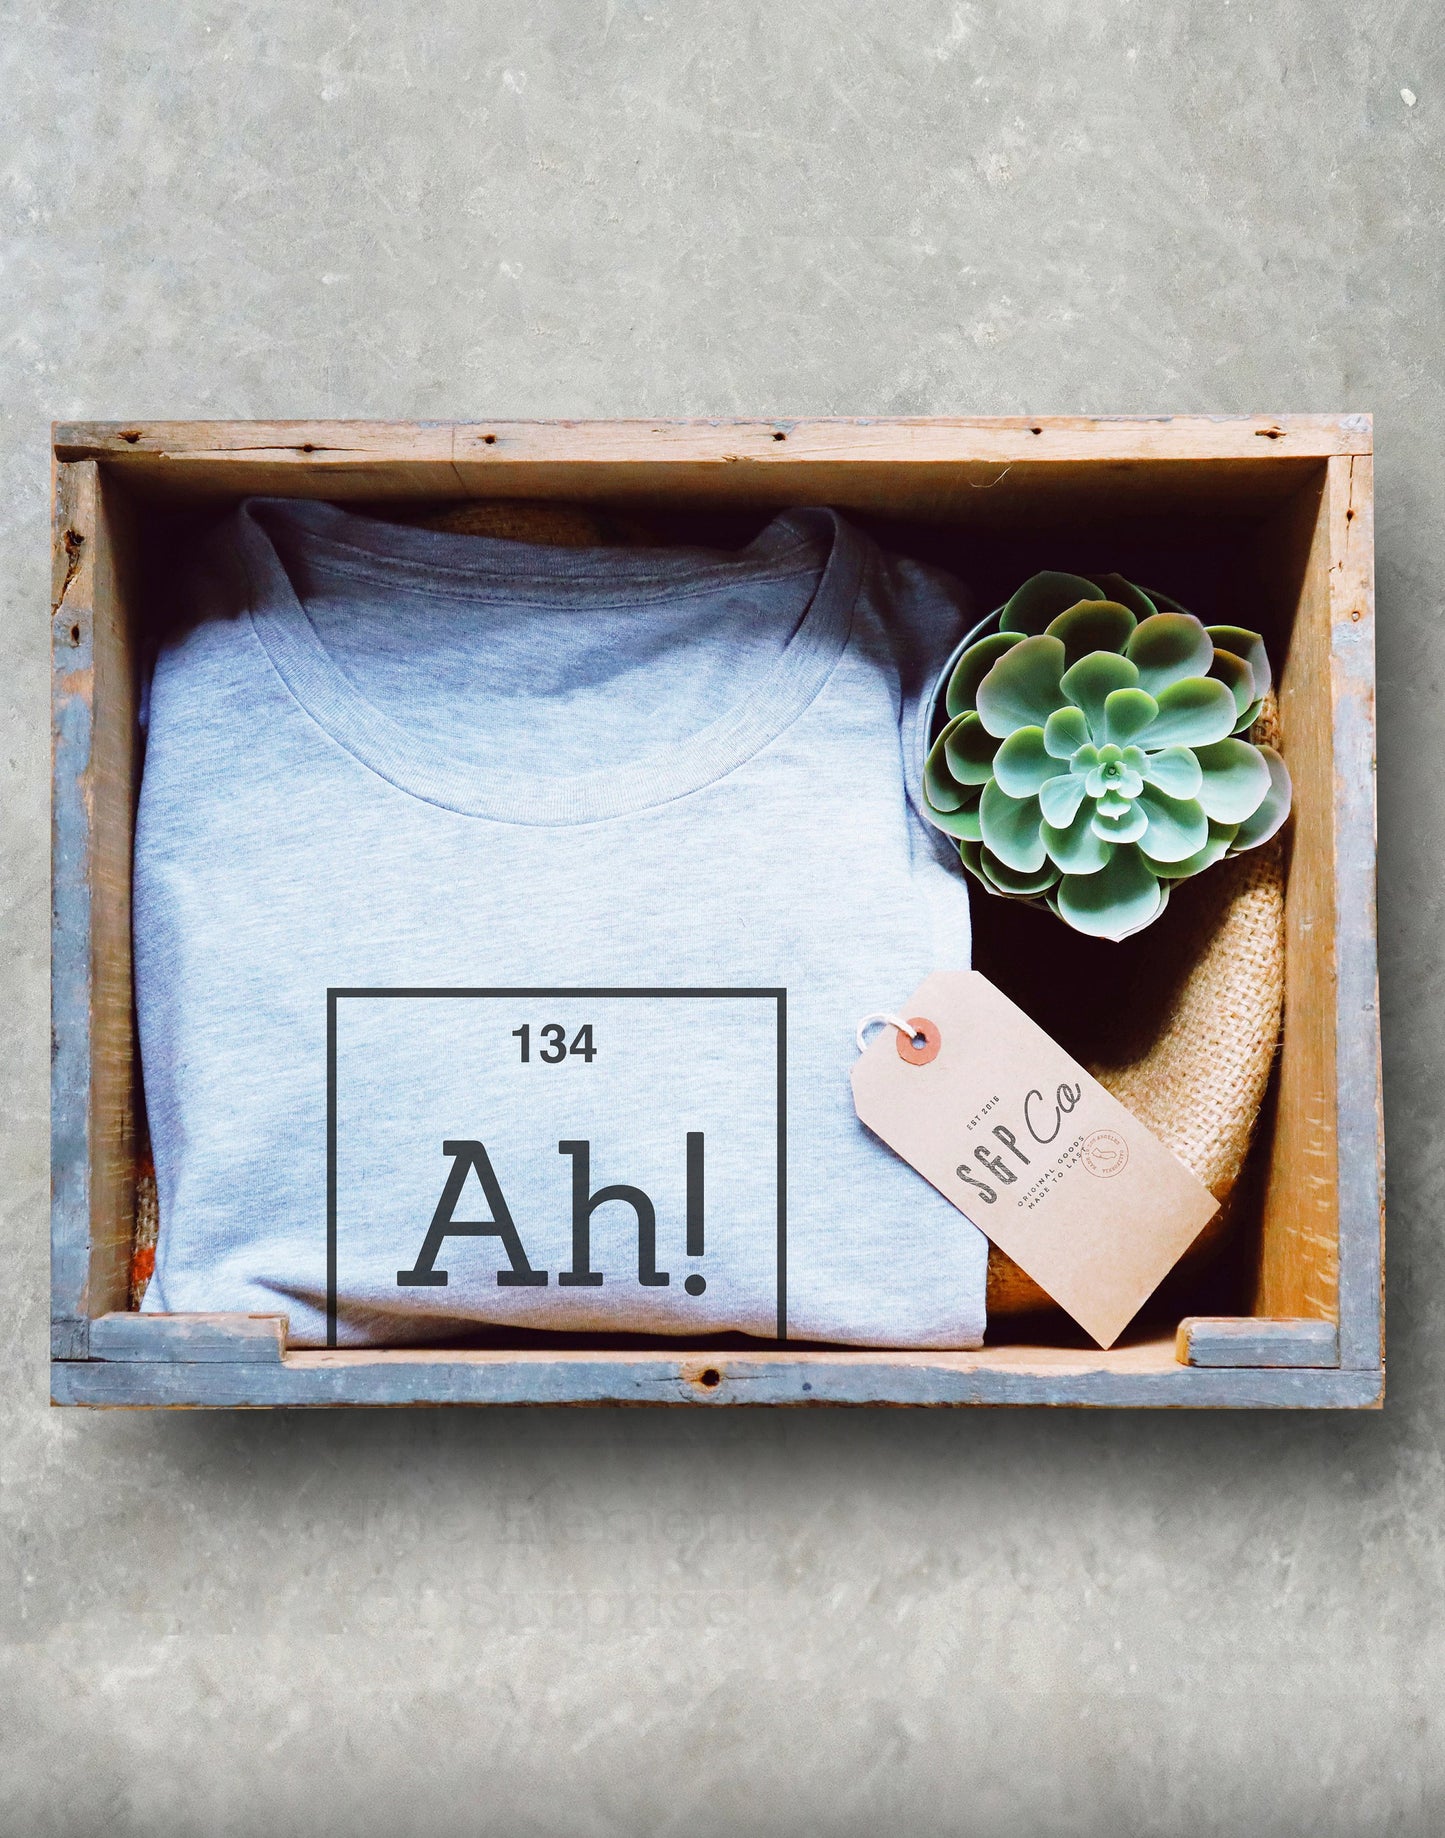 Funny Chemistry Pun Unisex Shirt - Ah The Element of Surprise - Periodic Table Shirt, Chemistry Shirt, Science Shirt, Funny Chemistry Gift